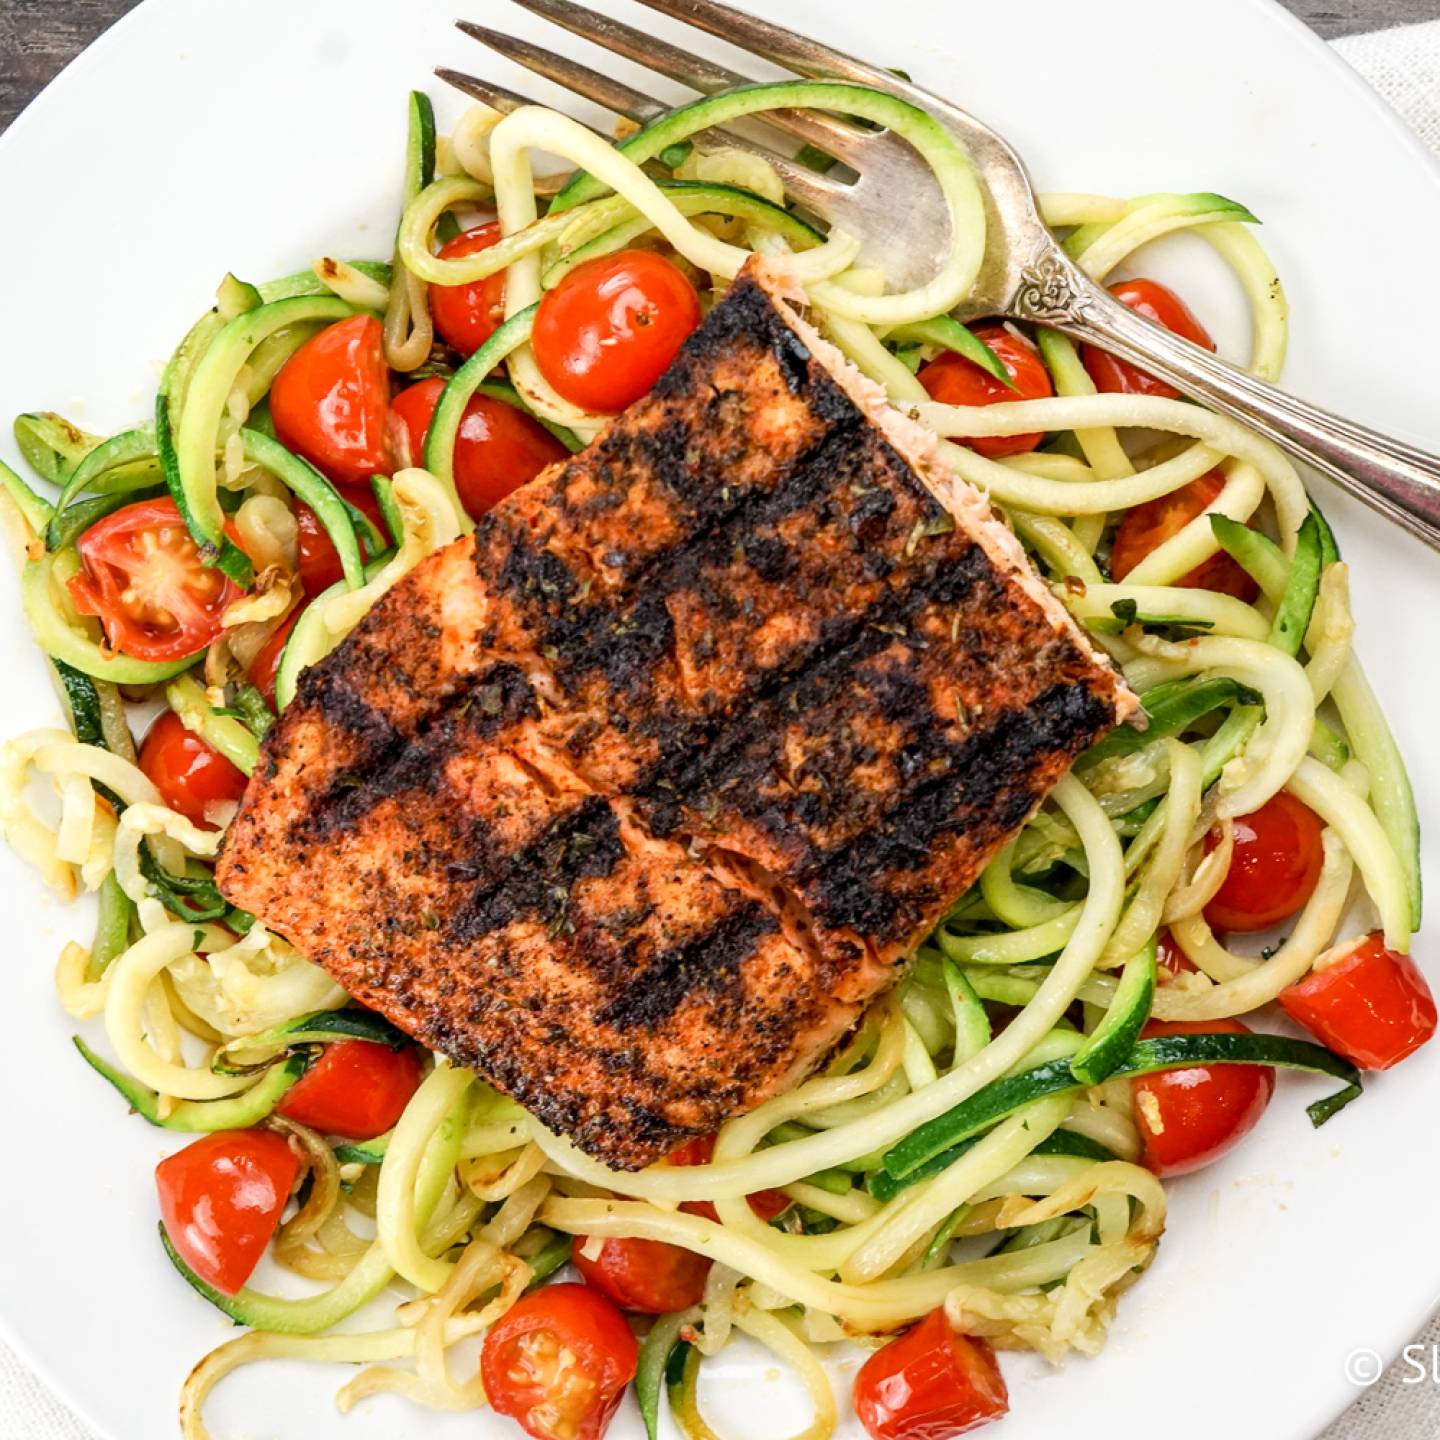 Blackened Salmon over a bed of zucchini noodles with cherry tomatoes.